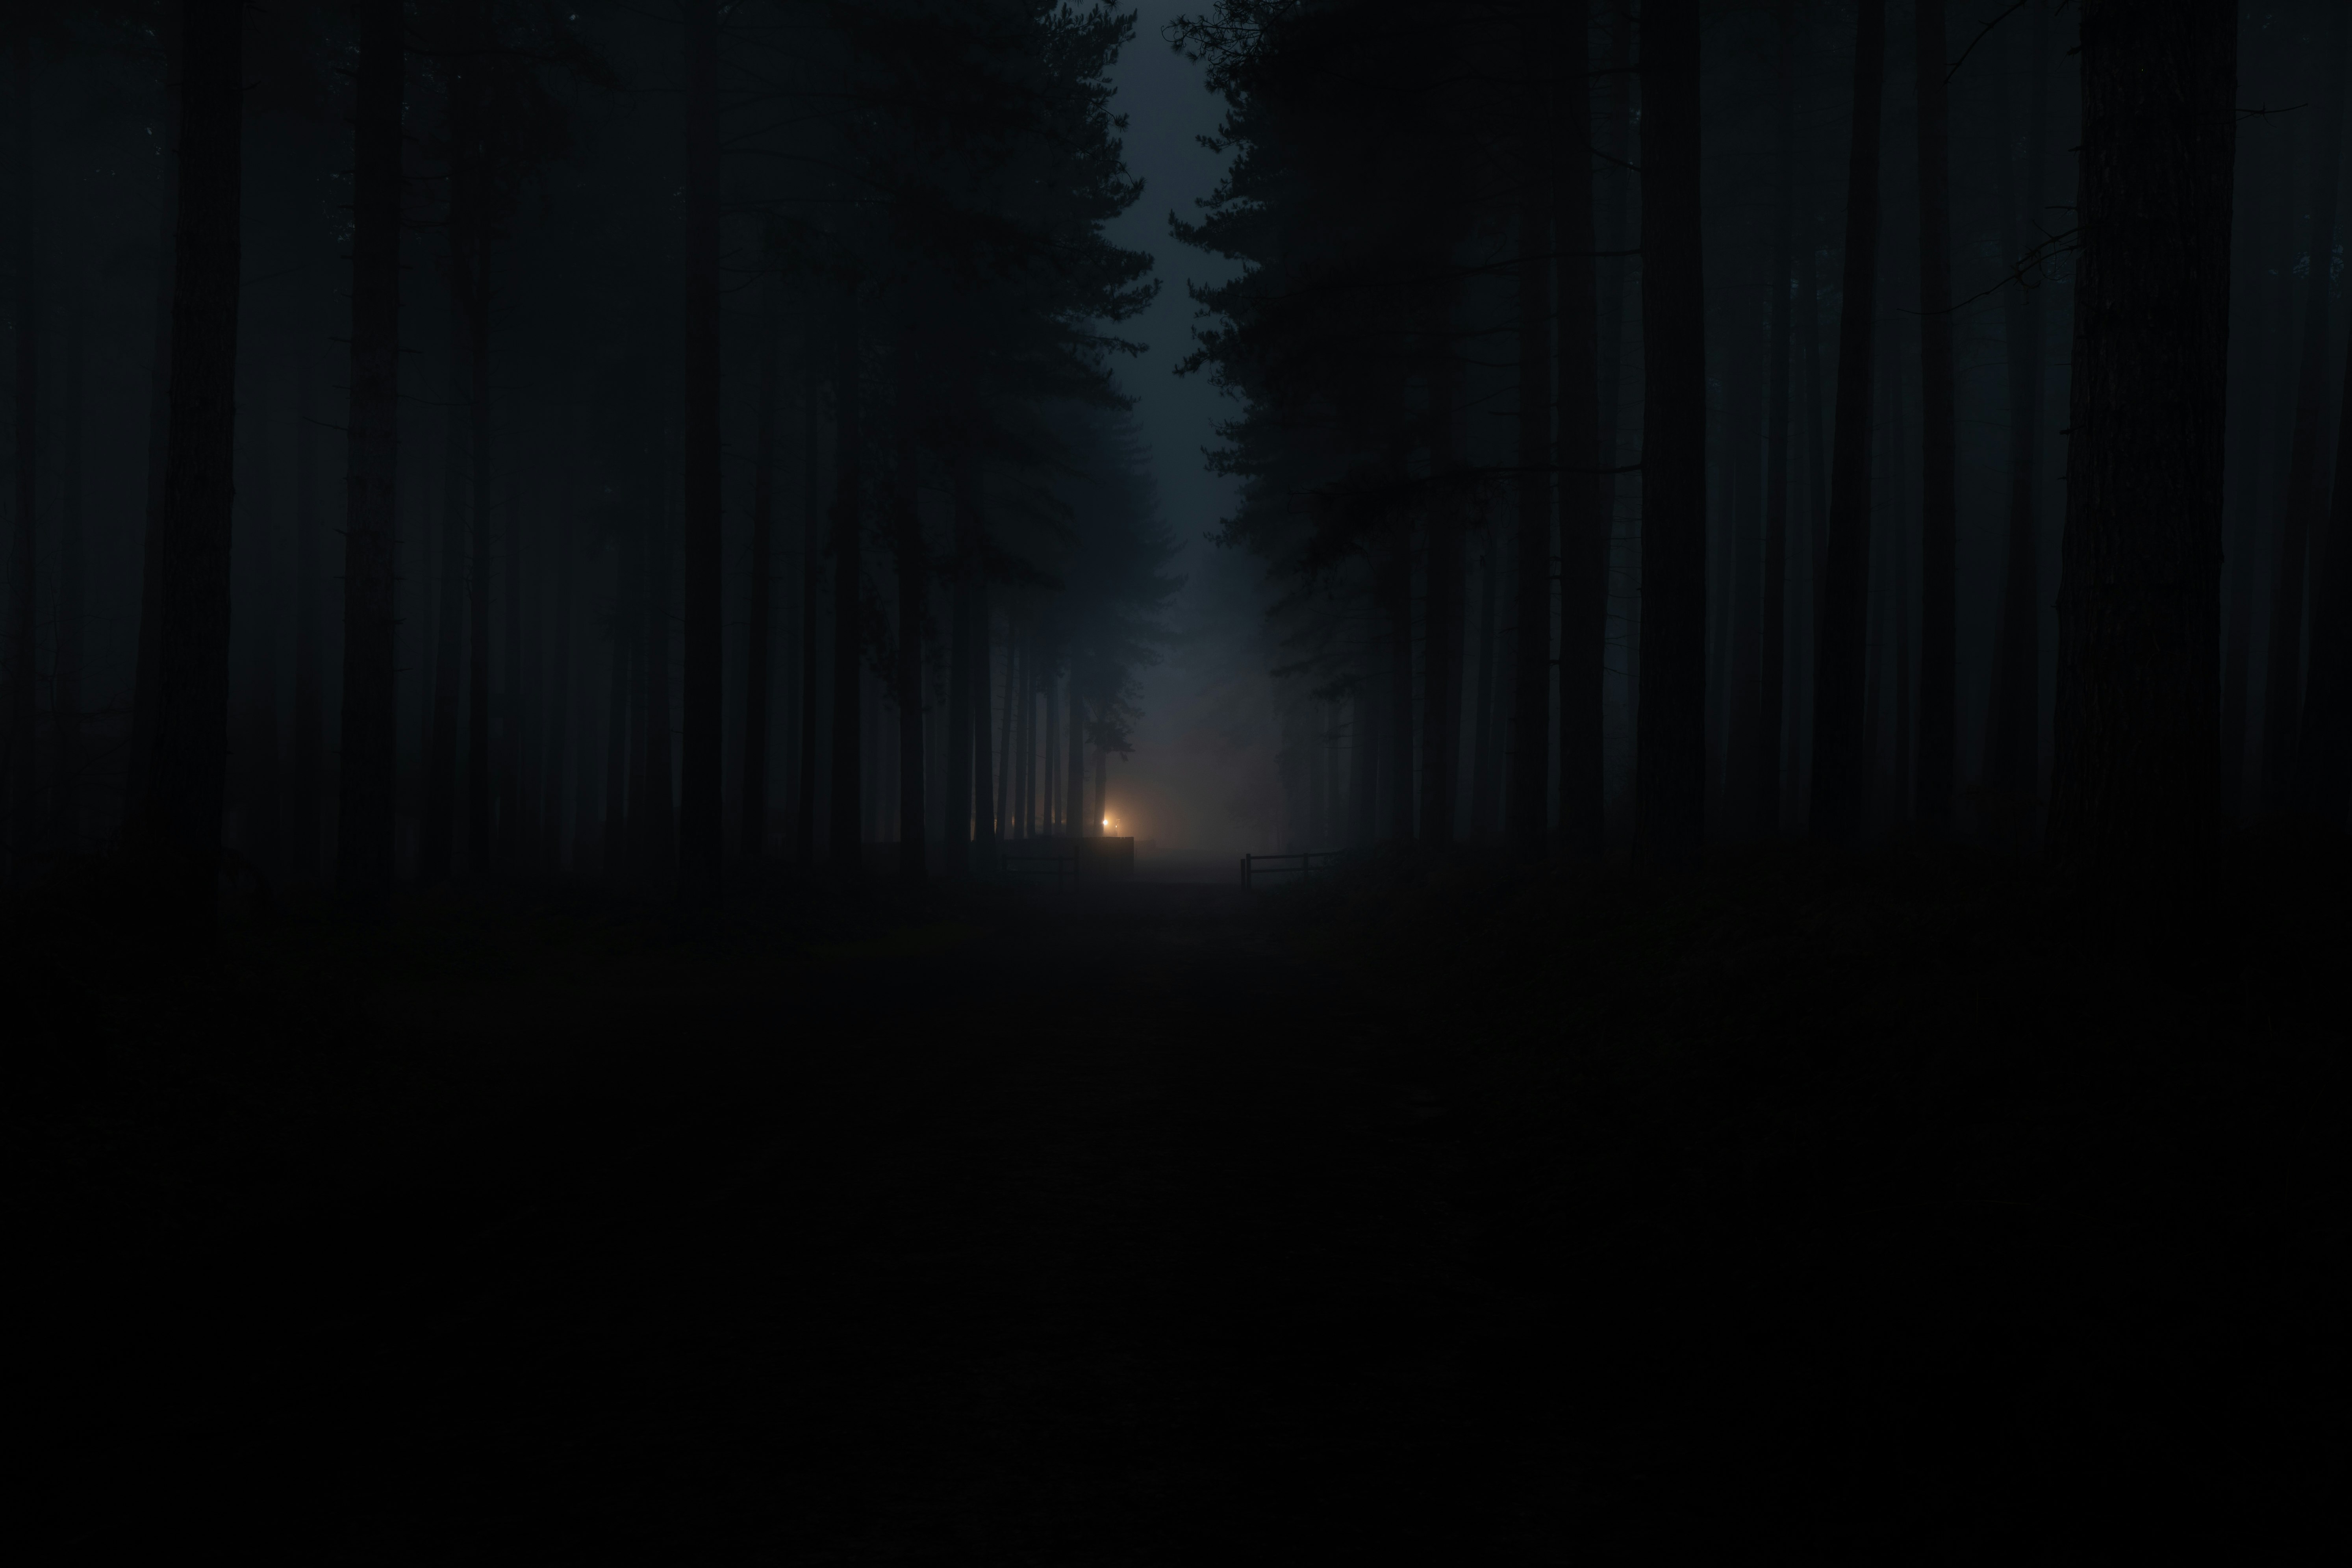 silhouette of person standing on forest during night time